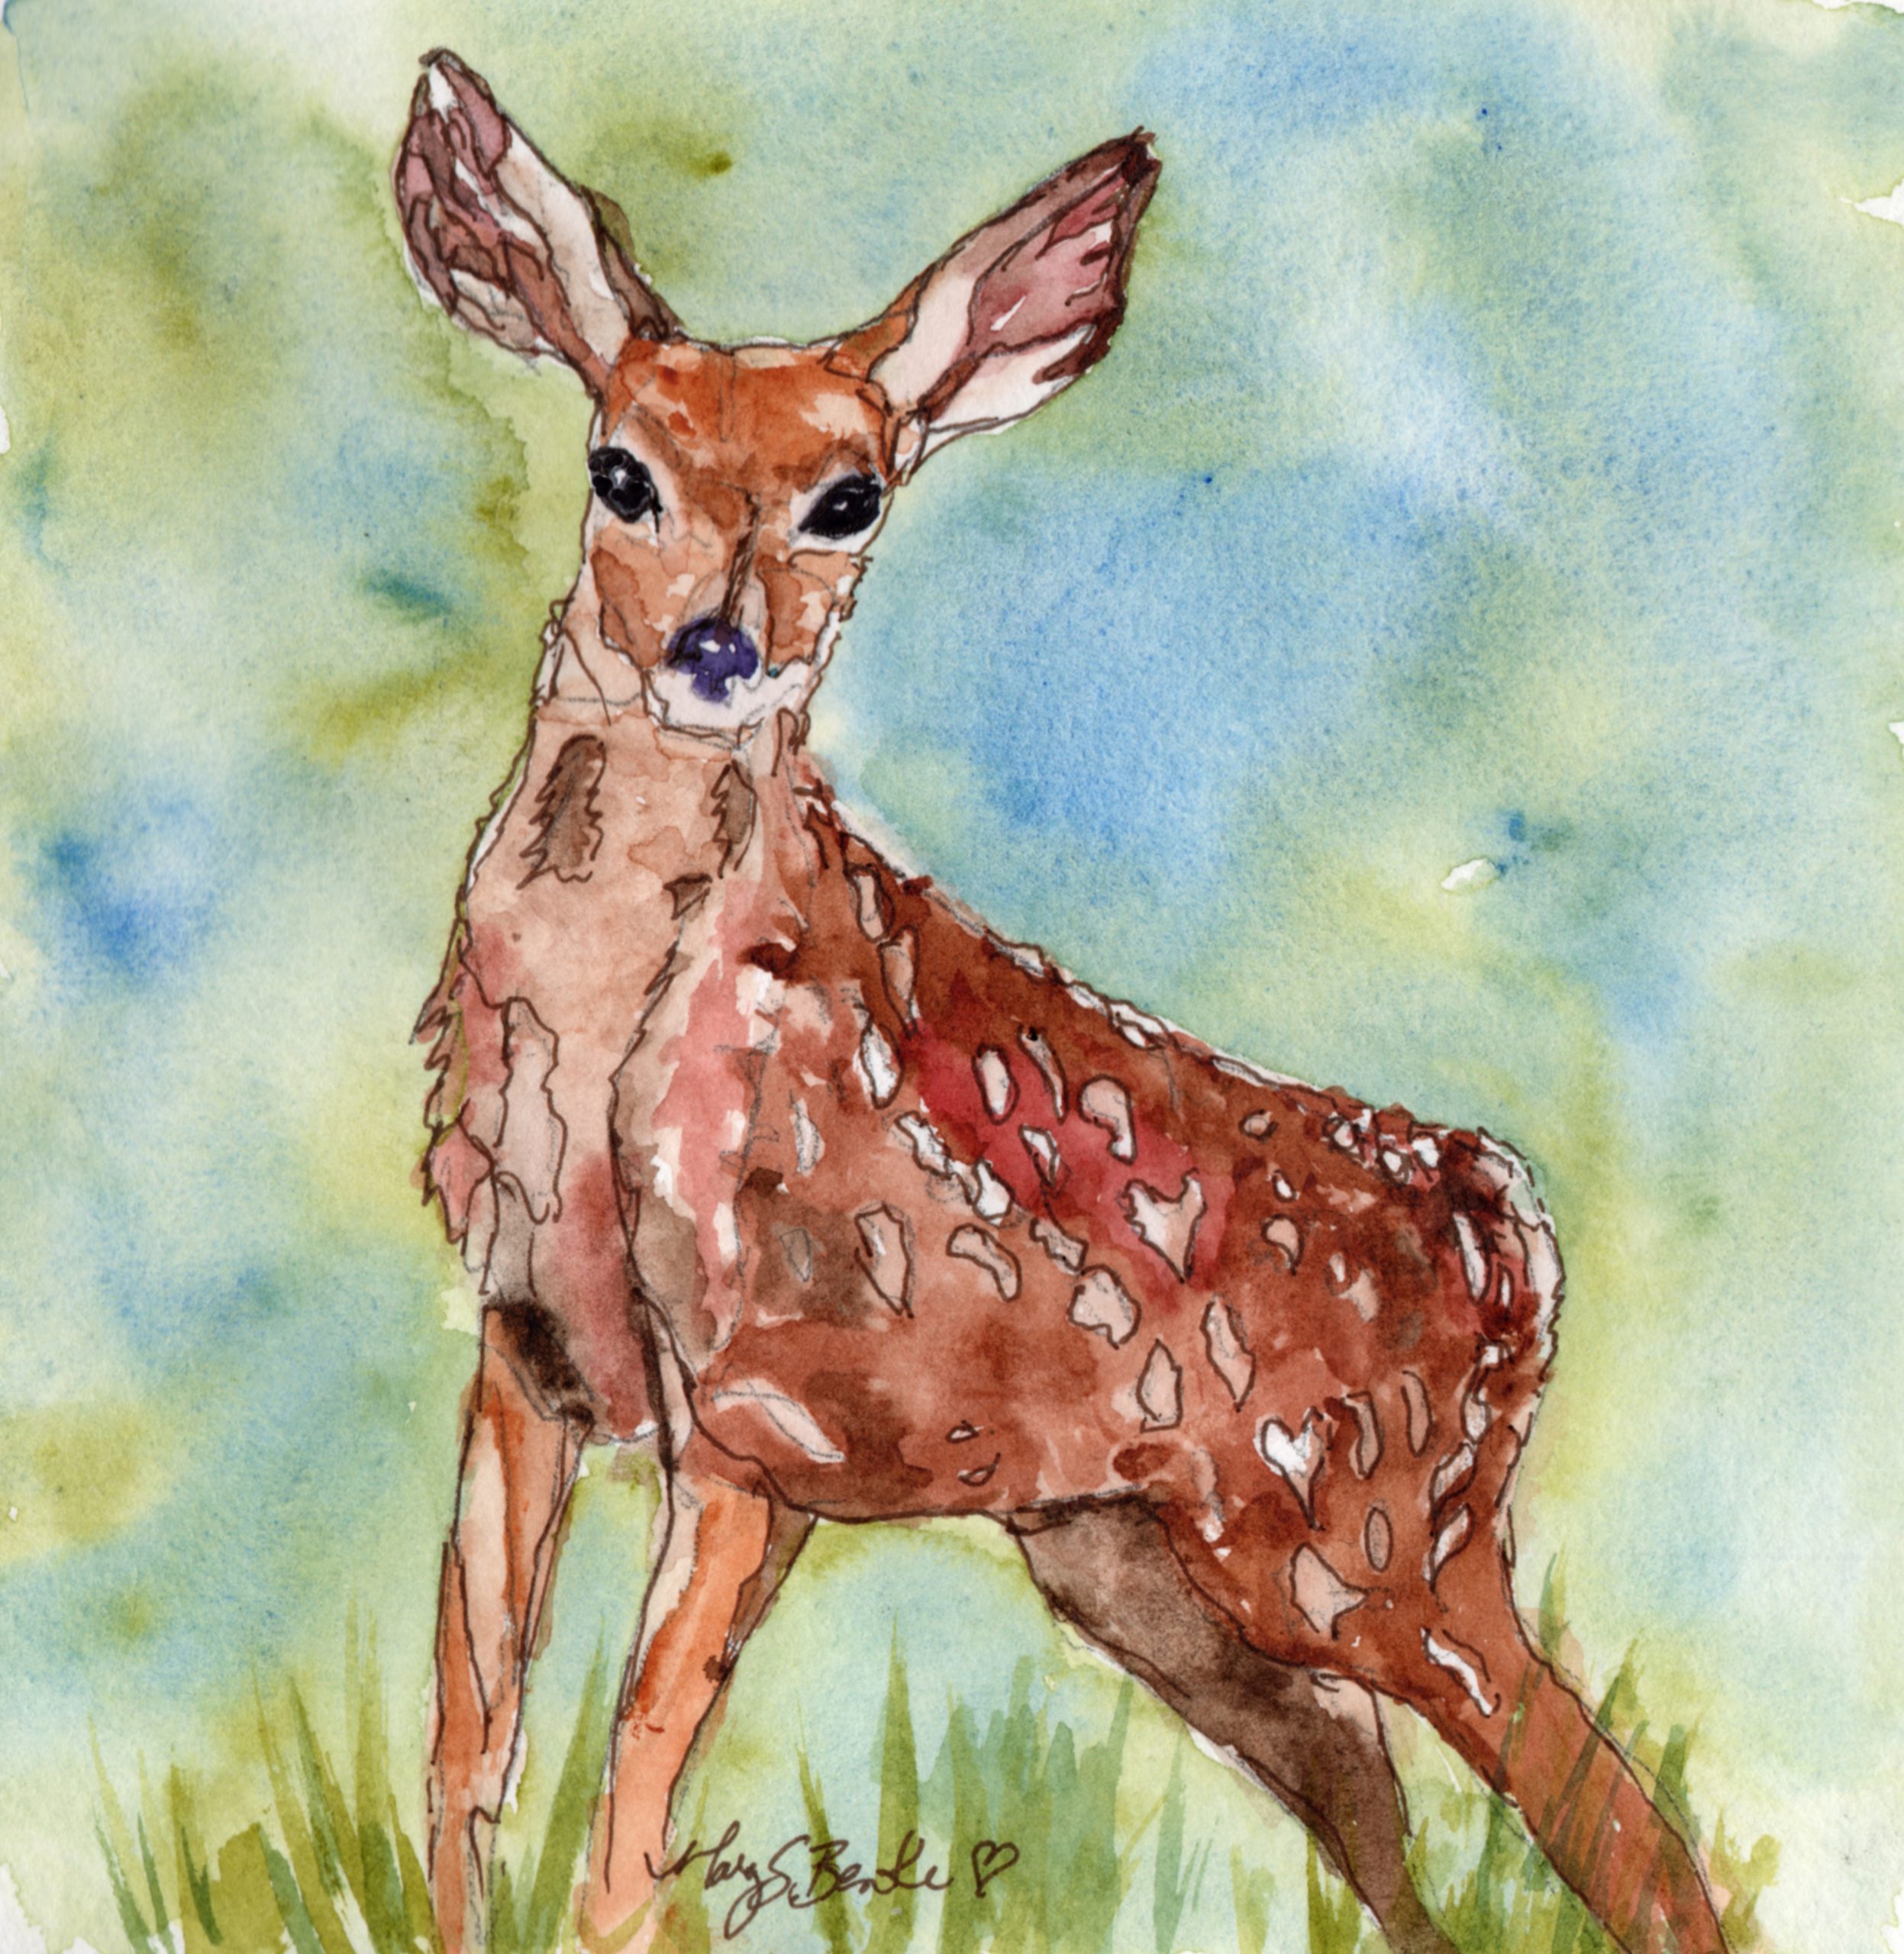 A curious, fawn painted in soft watercolors of reds, browns, and greens watches the viewer with interest by Mary Benke.